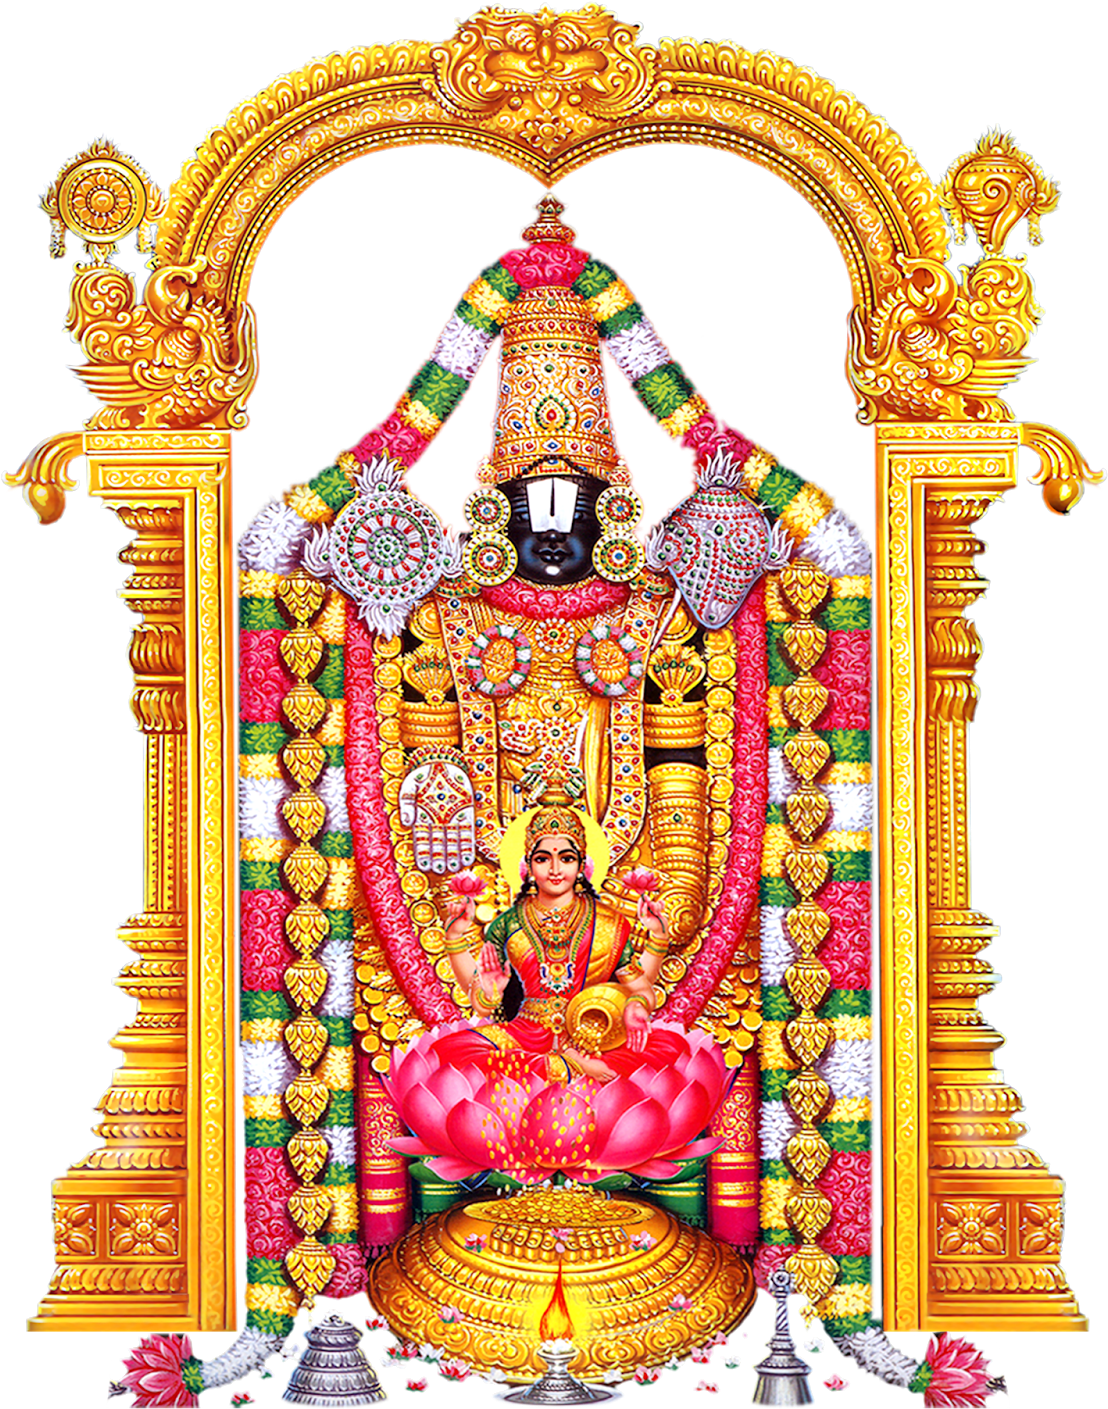 A Gold Ornate Frame With A Statue Of A Hindu God With Venkateswara Temple, Tirumala In The Background